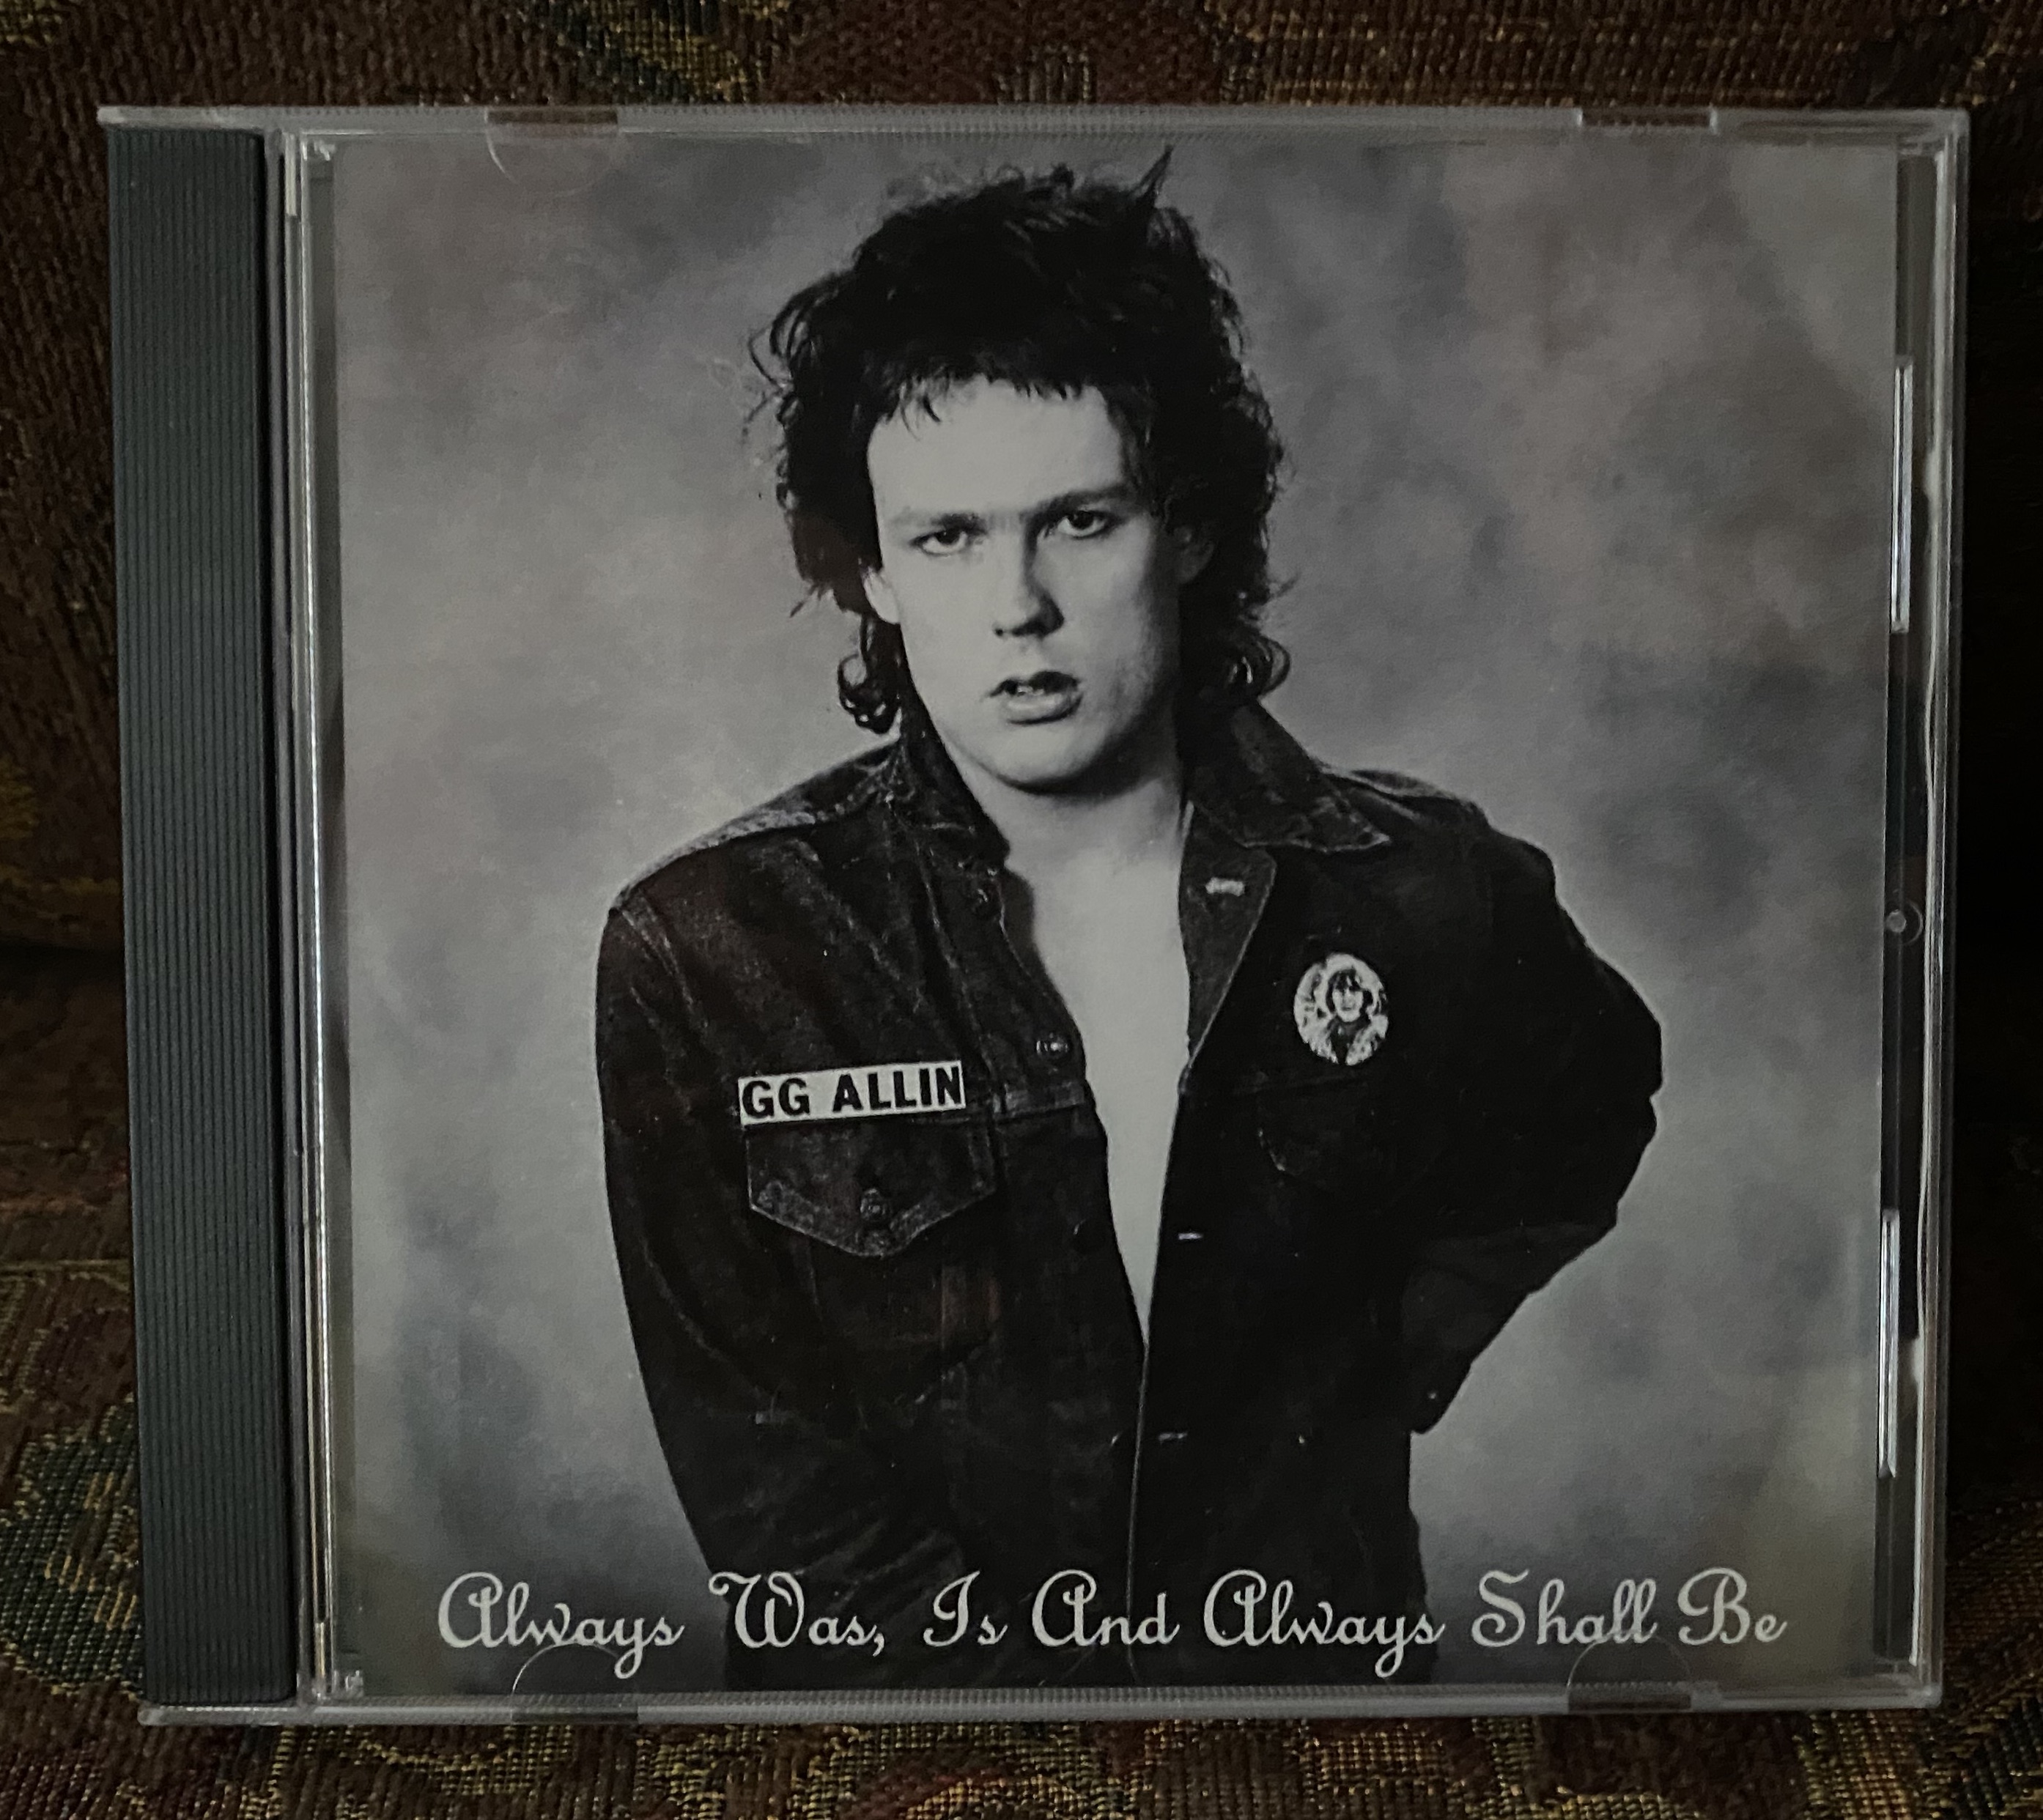 Always Was, Is And Always Shall Be Ltd Ed CD: CD - GG Allin & The 